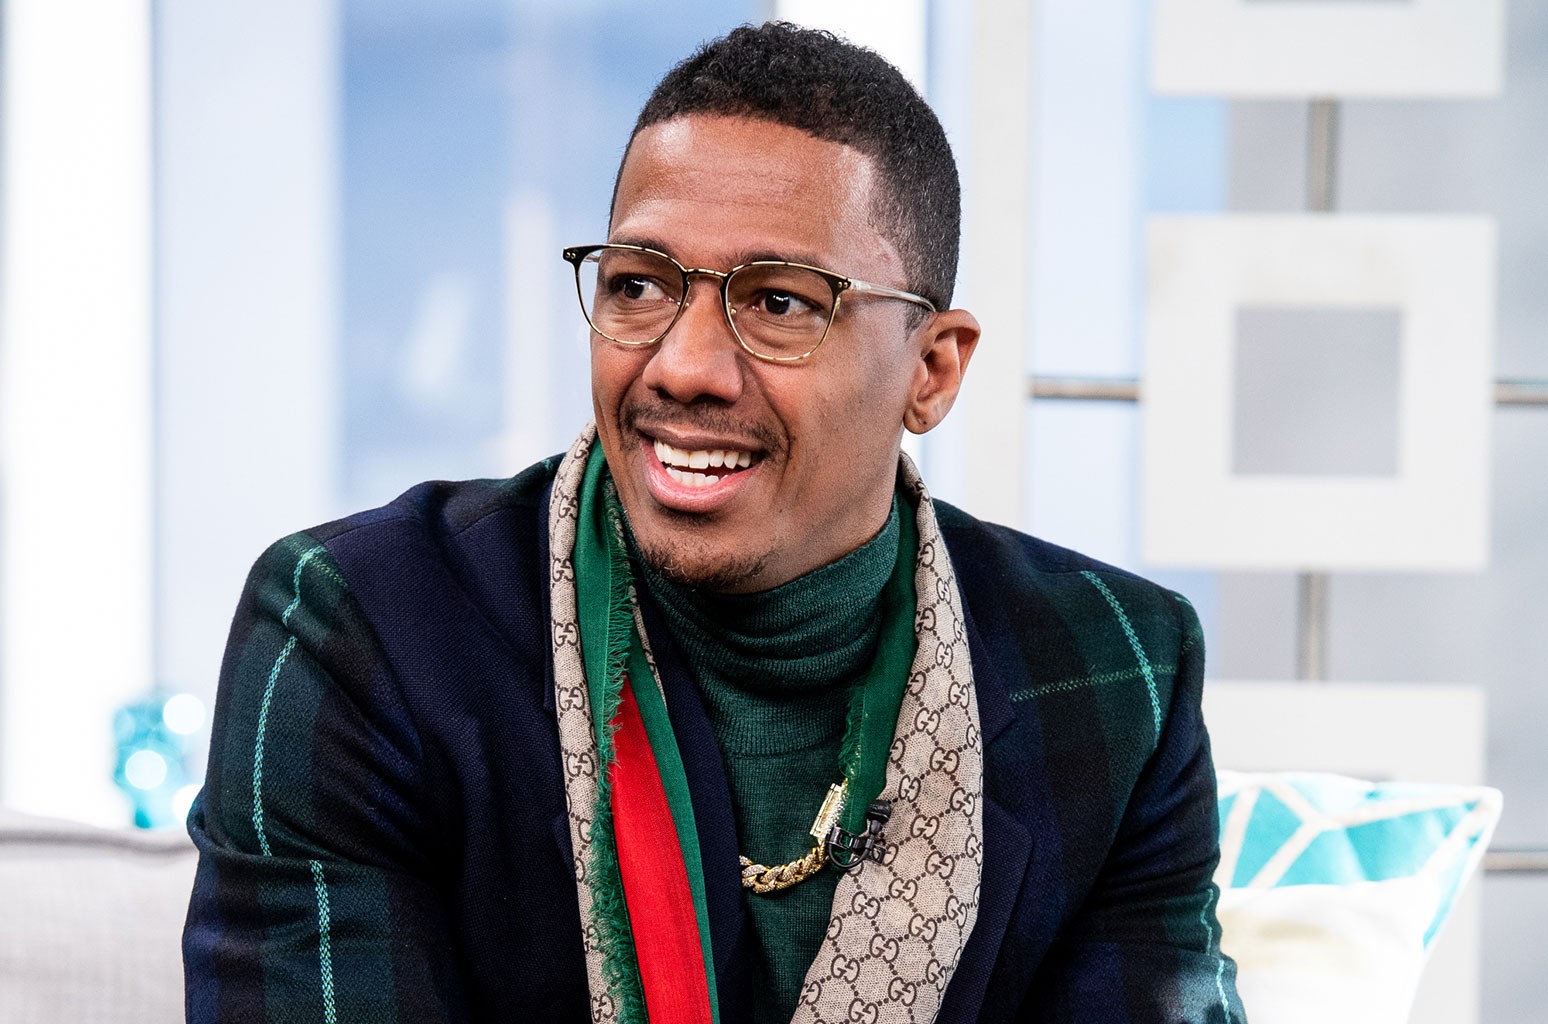 Nick Cannon Welcomes Baby No. 8 with Bre Tiesi | The Source